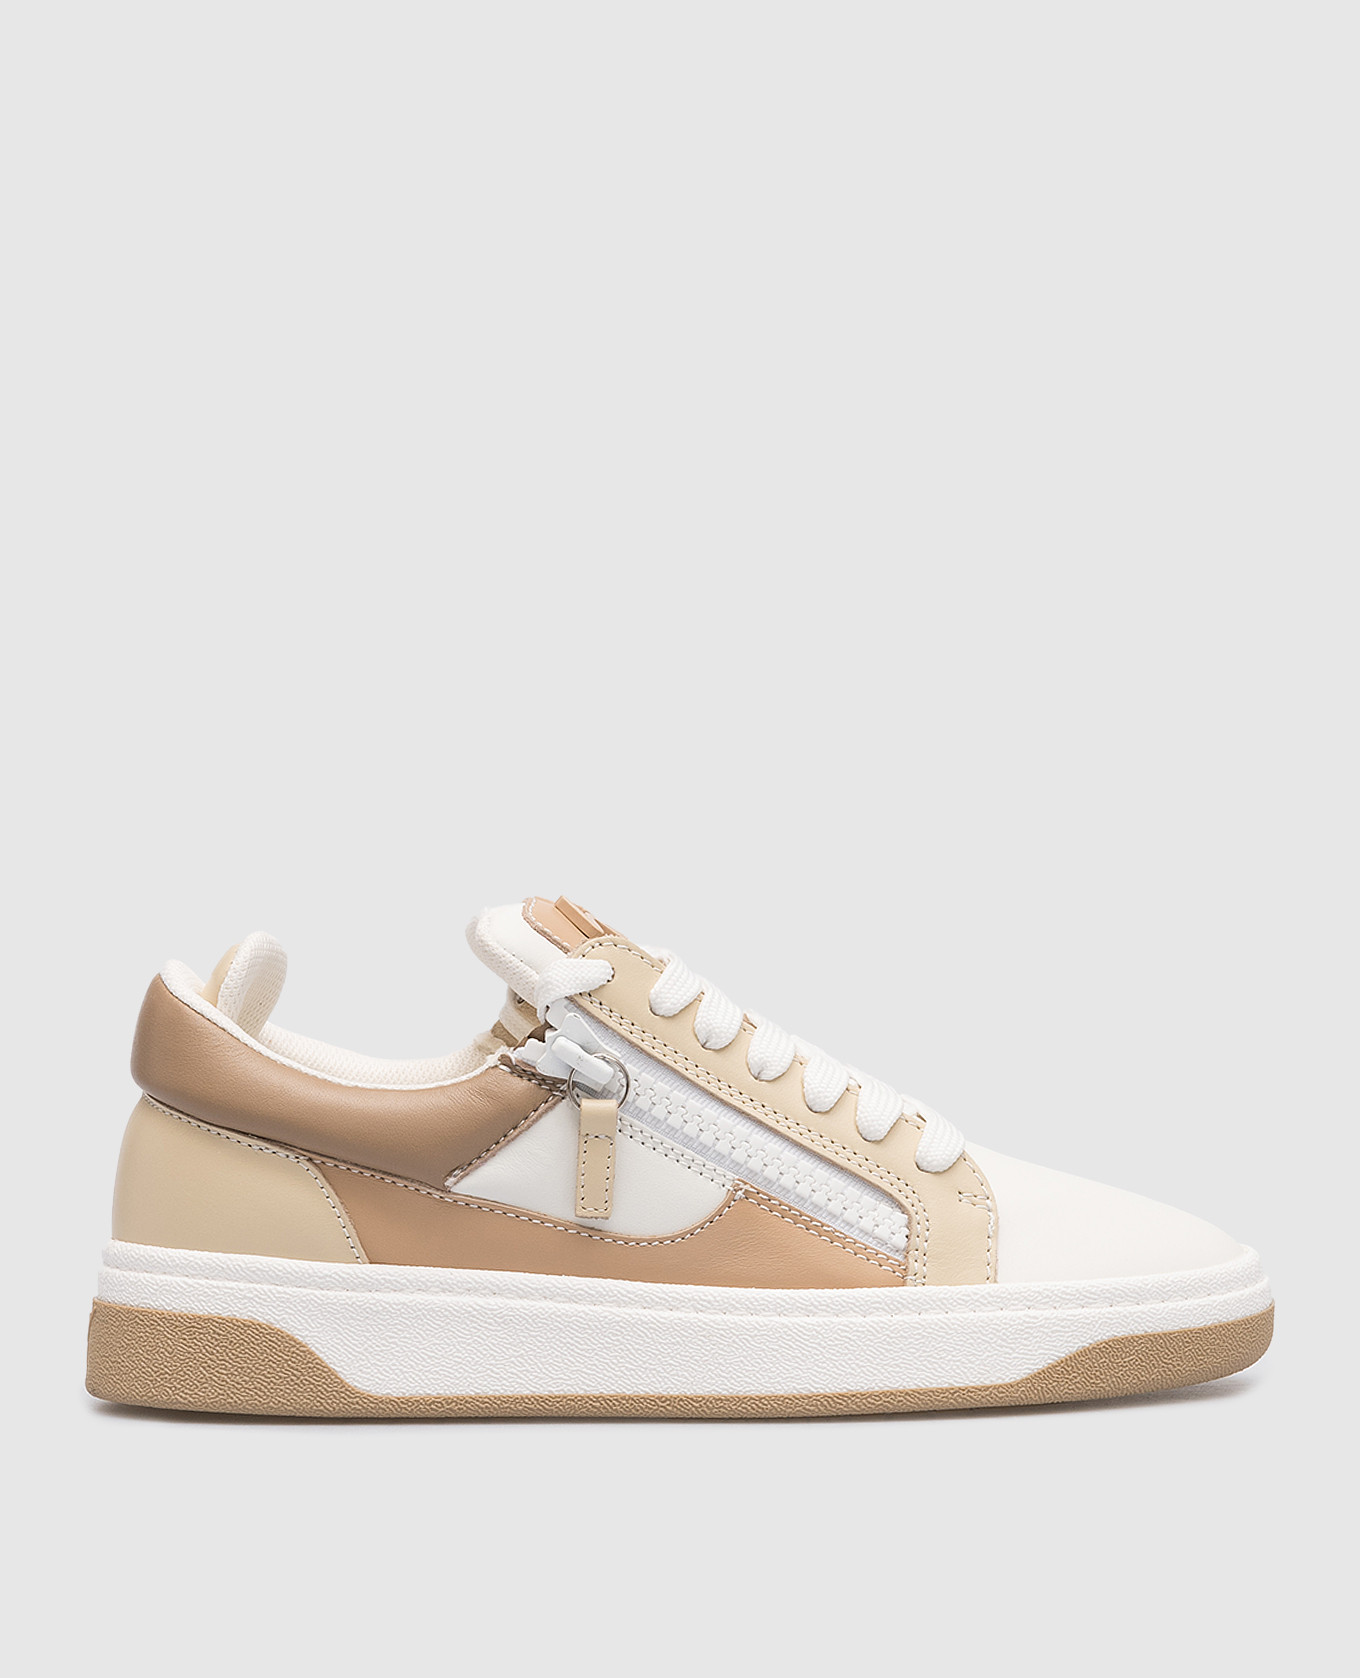 Gz94 beige leather sneakers with metallic logo